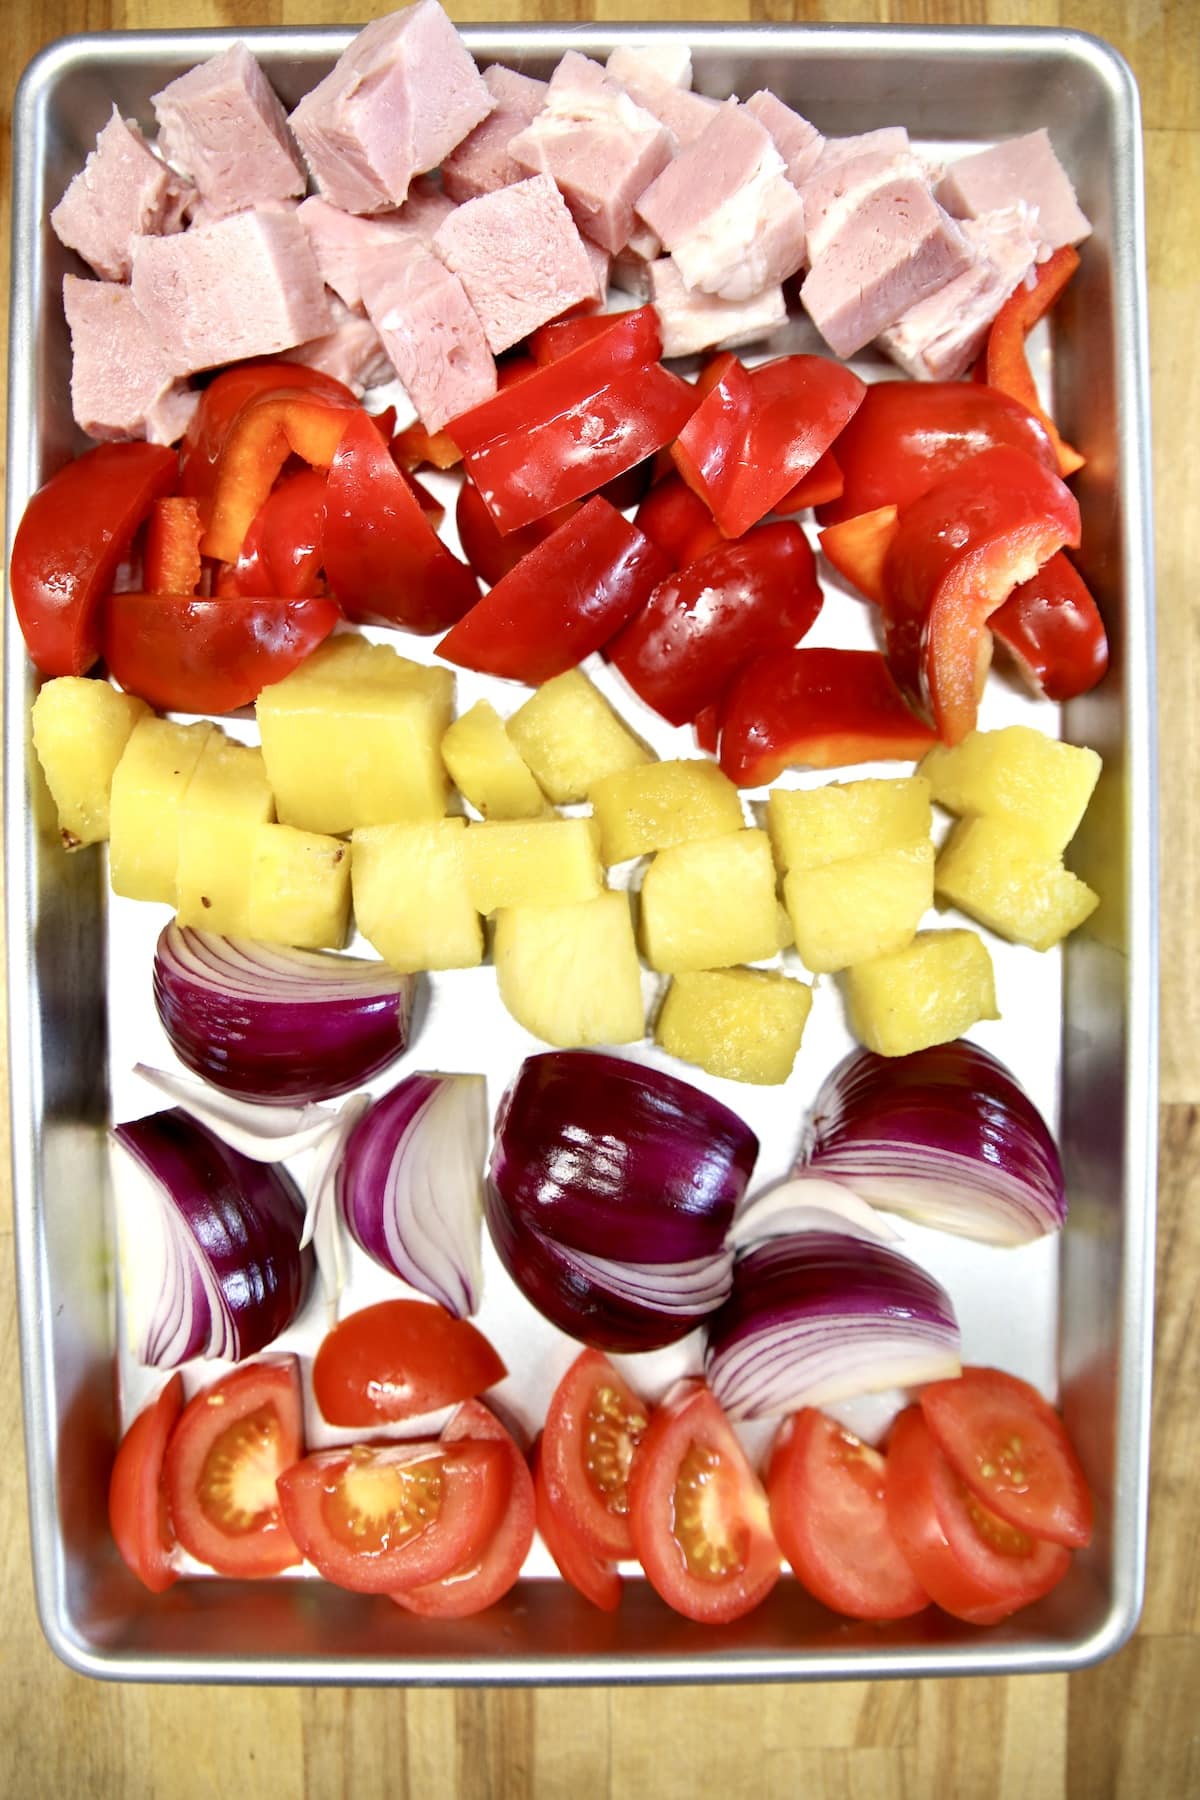 Tray with ham chunks, , red bell peppers, pineapple, red onions, tomatoes.